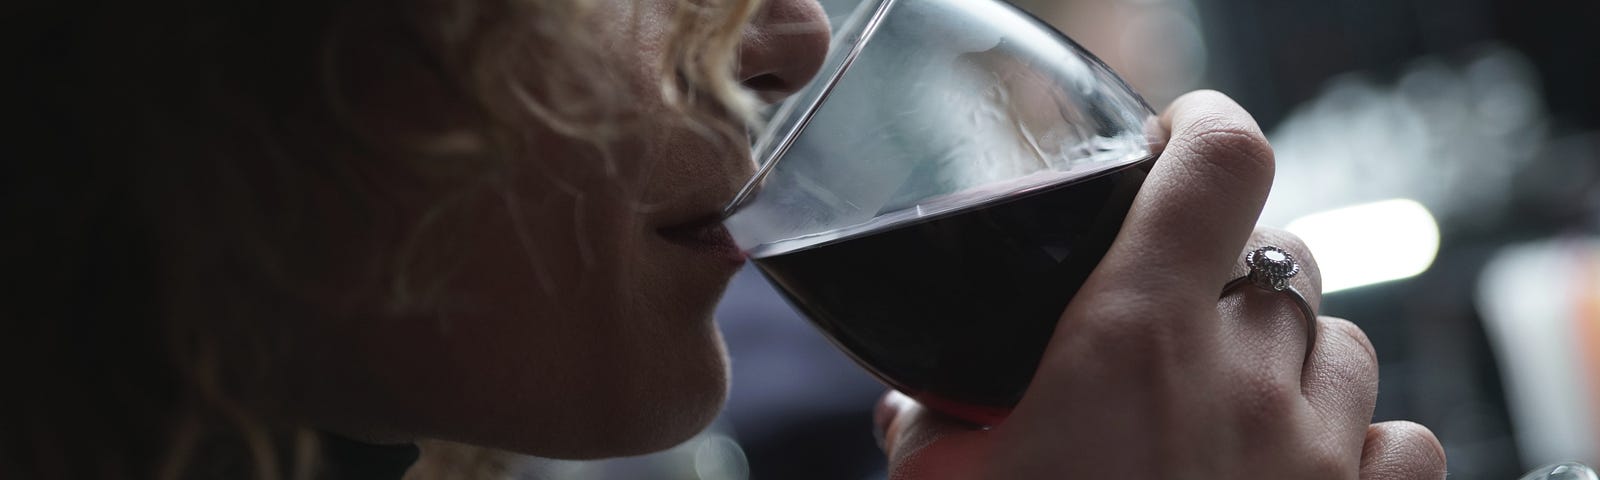 A close-up profile of a person with long curly hair hiding their face drinking red wine from a stemmed glass.